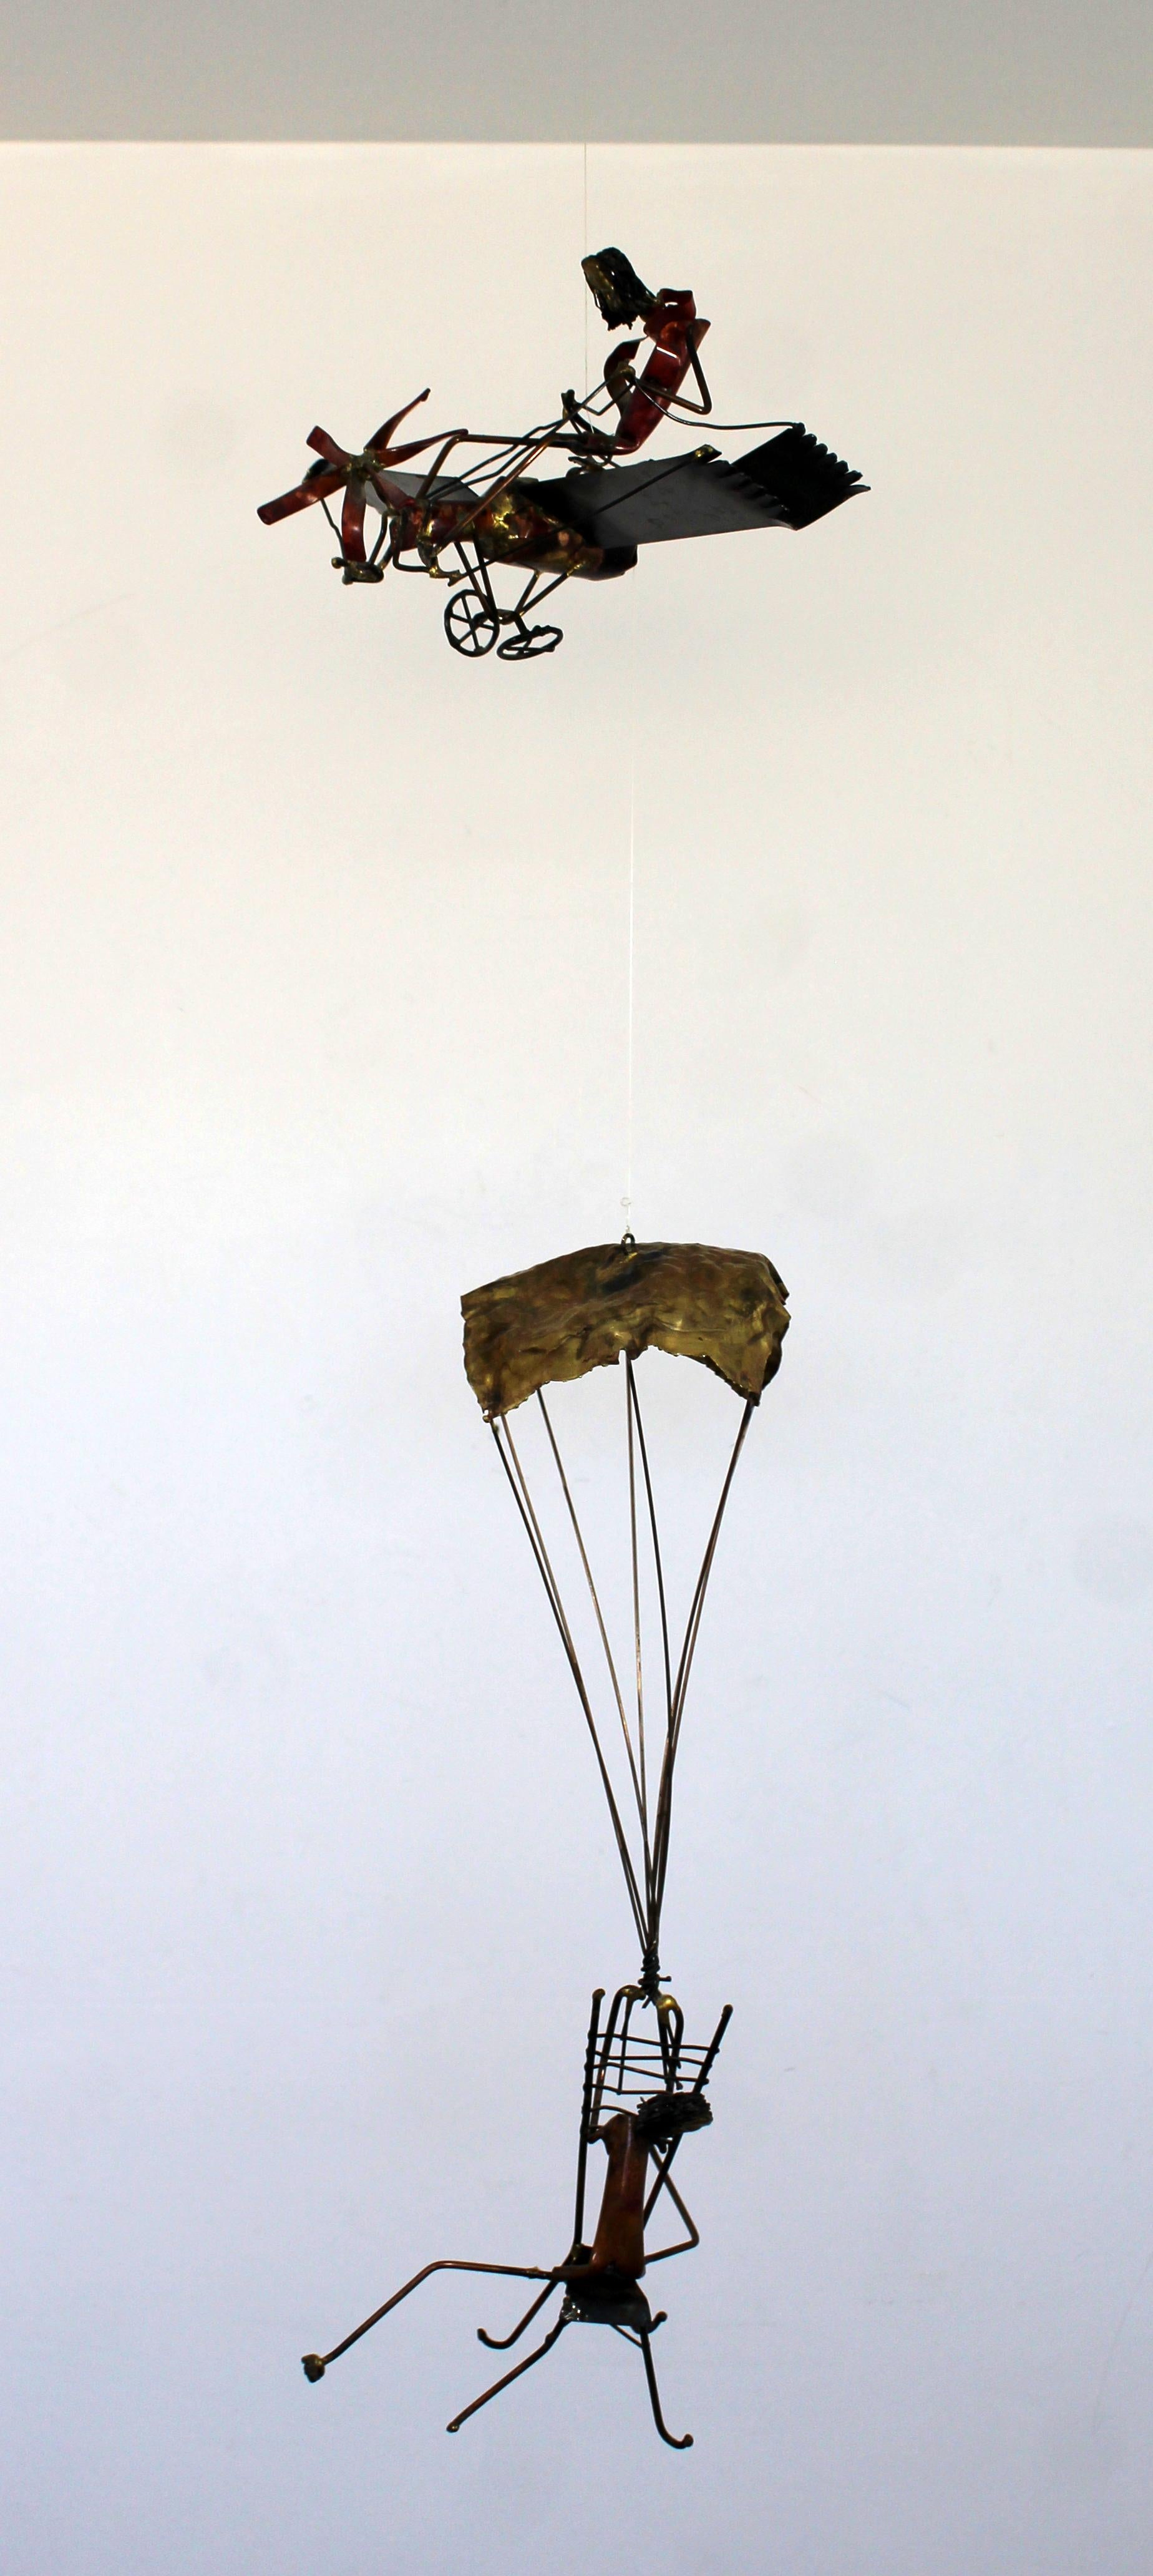 For your consideration is a whimsical, Brutalist brass wall sculpture of a man in a plane and a man hanging by a parachute beneath, in the style of Curtis Jere, circa 1970s. In excellent vintage condition. The dimensions are 12